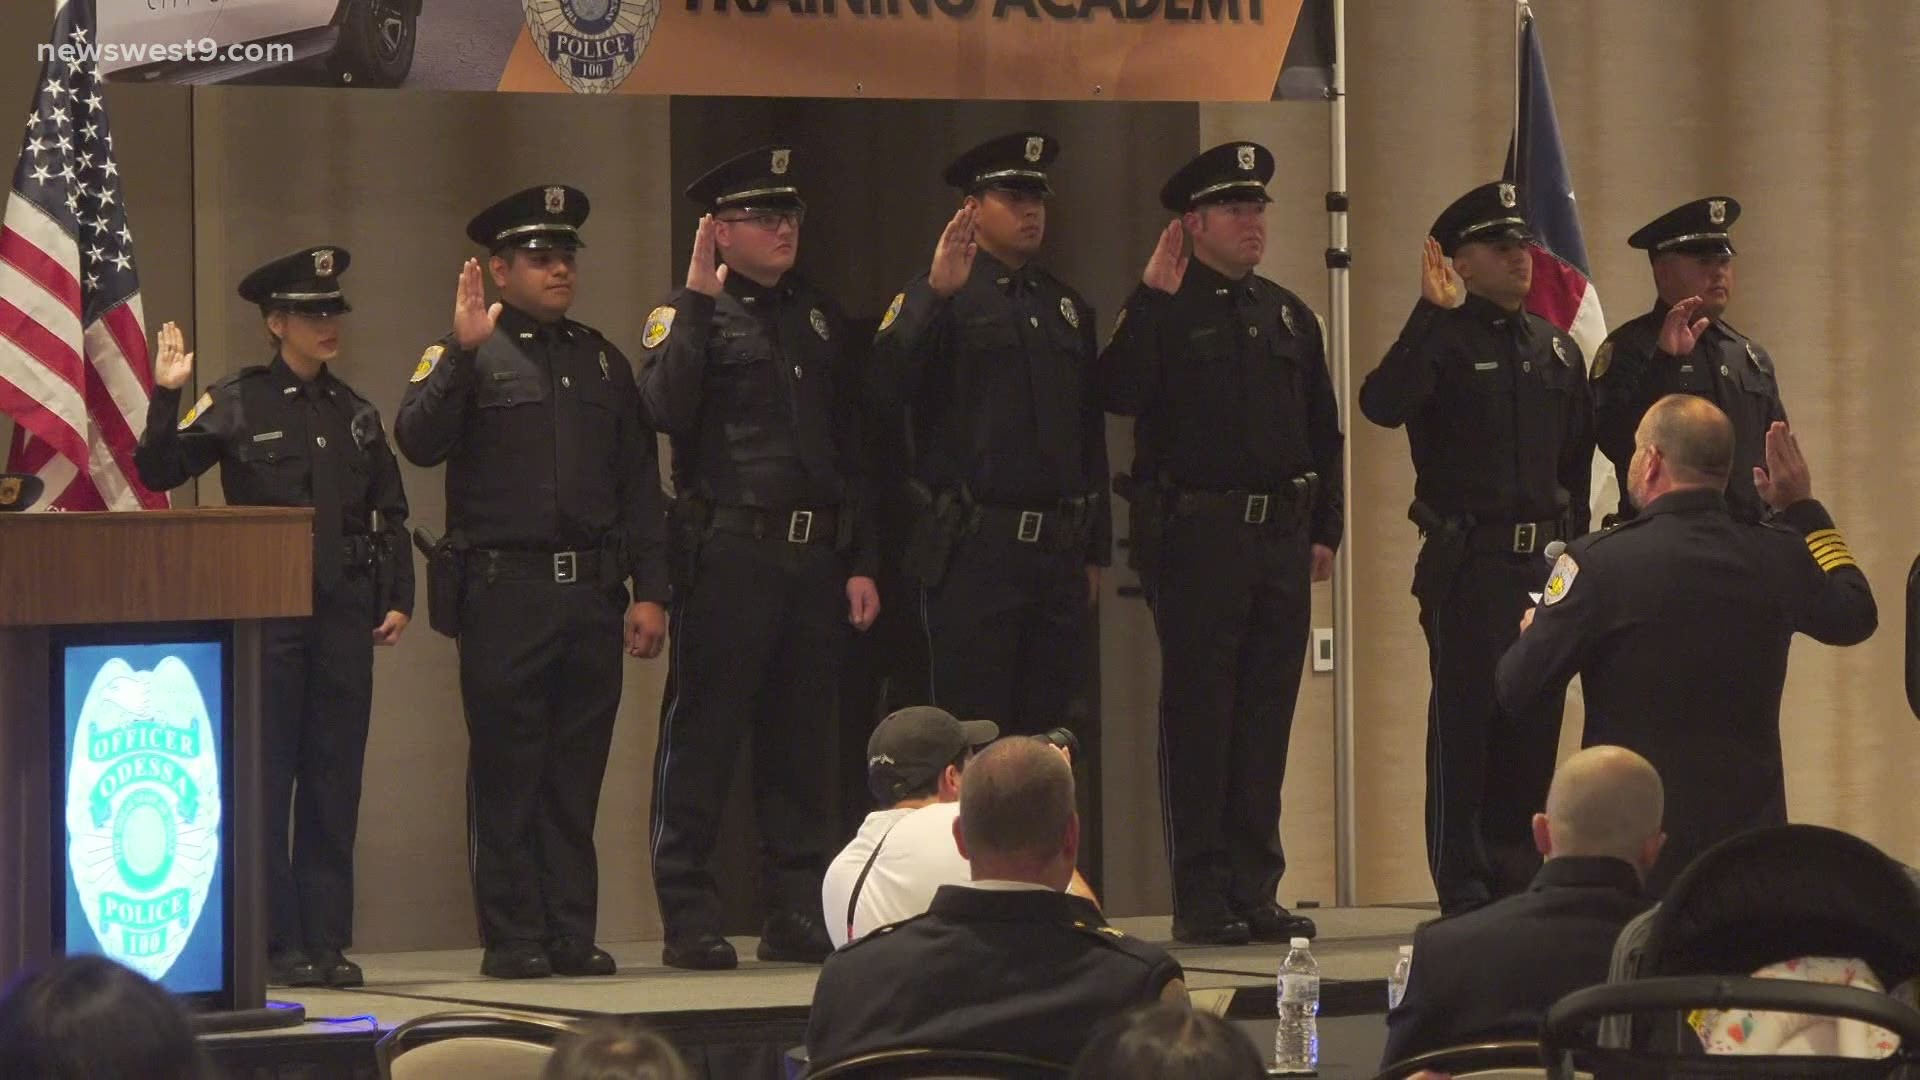 A batch of six new officers is now ready to protect and serve.